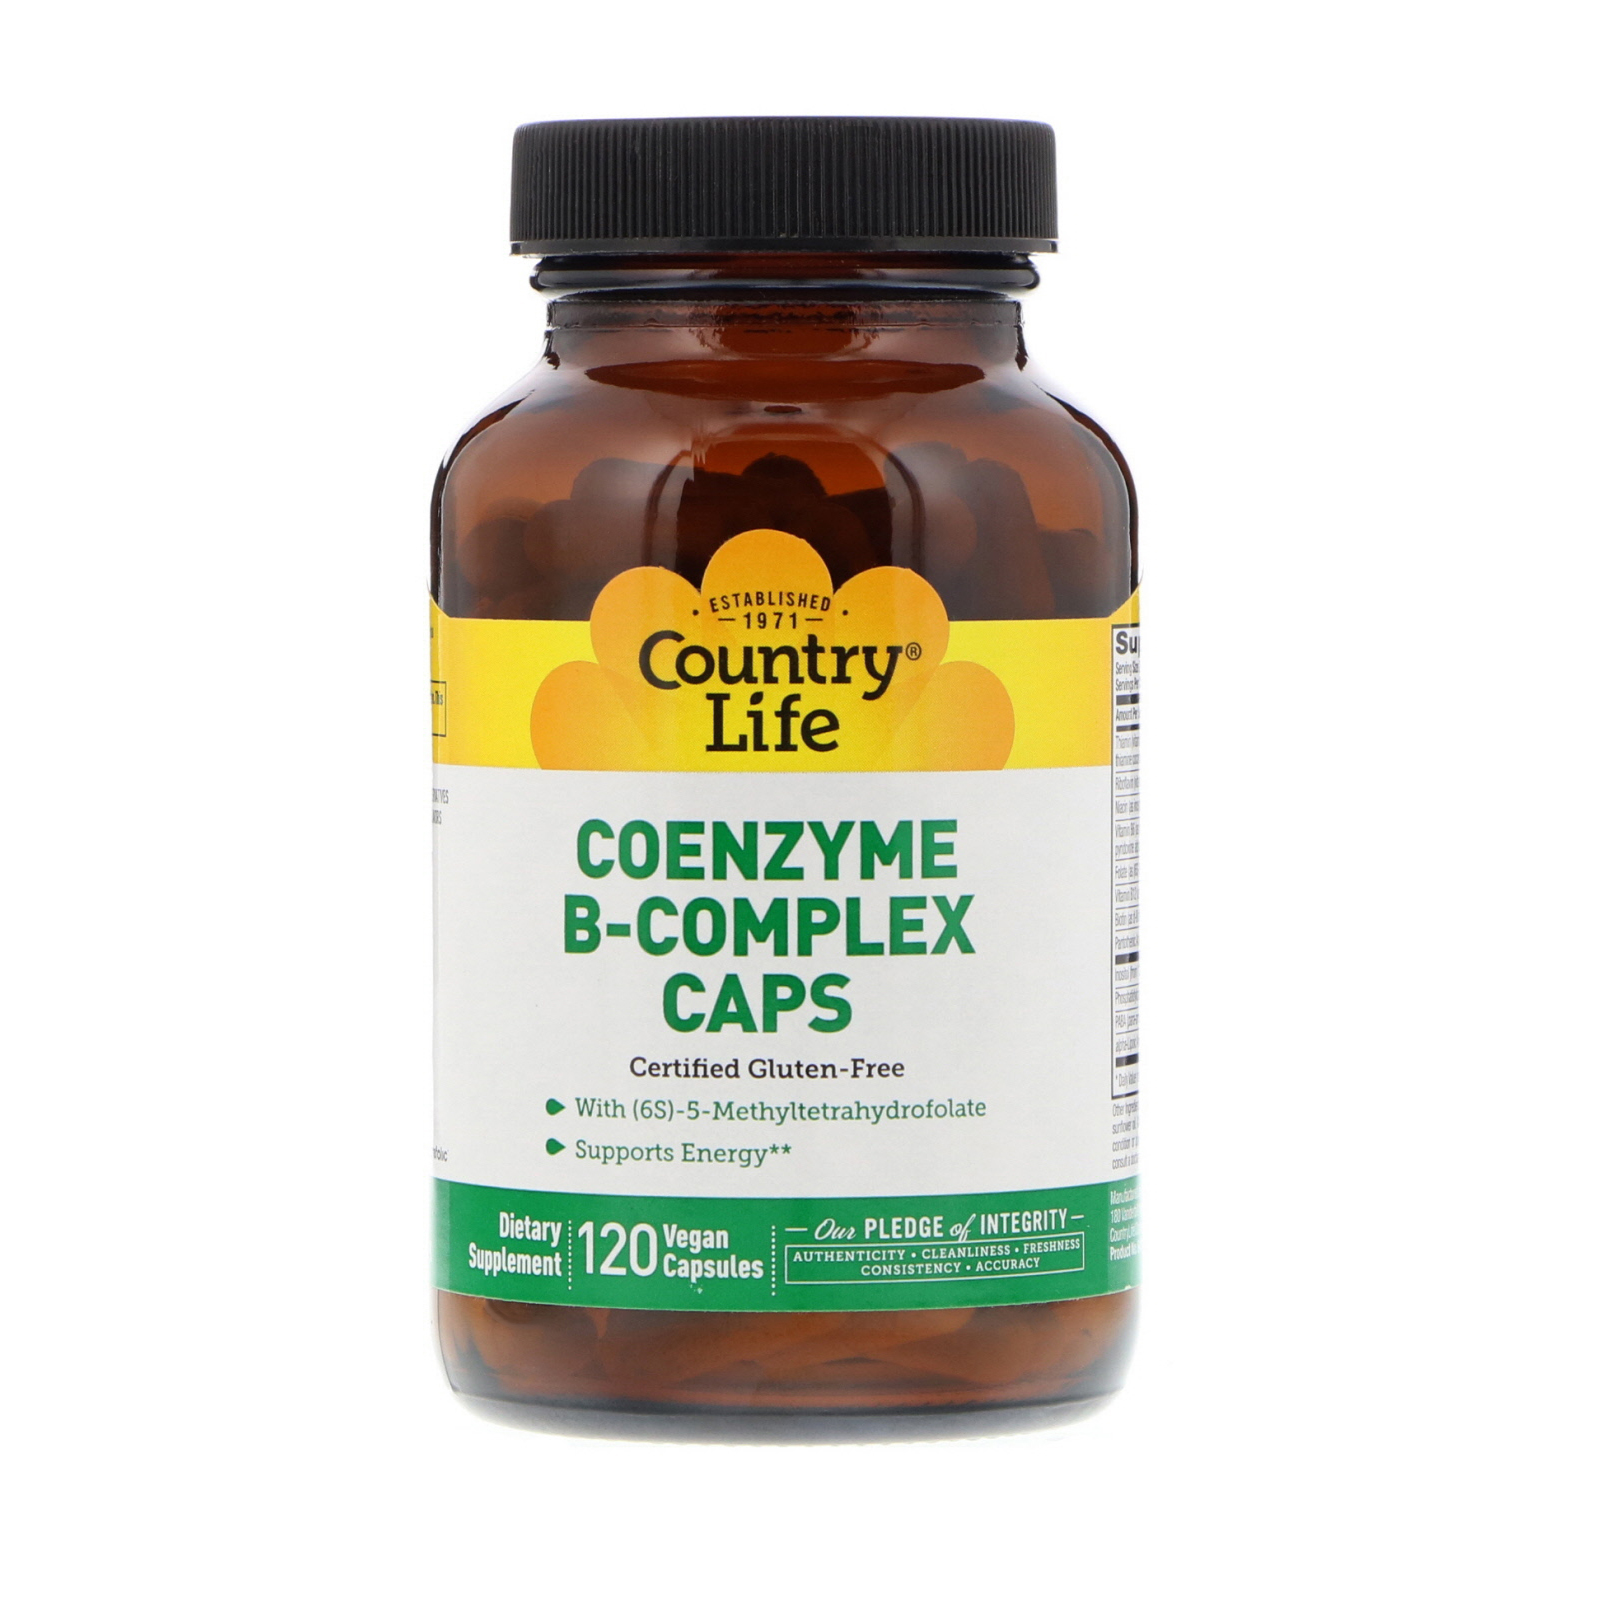 Country Life Coenzyme B-Complex Caps 1 Vegan Capsules Gluten-Free, GMP Quality 2